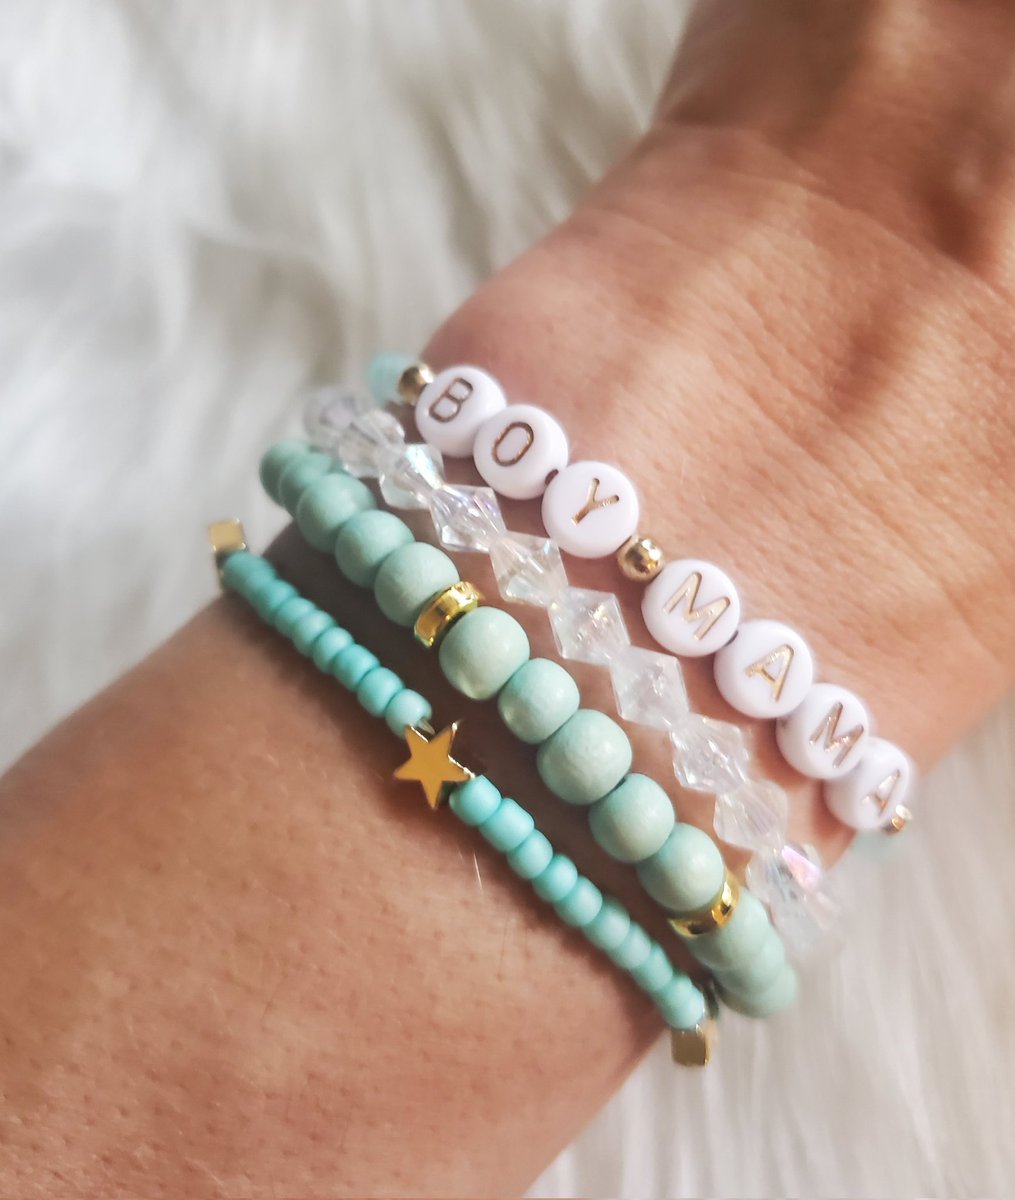 Mother's Day is coming up Sunday, May 12th! 🌼🌷 Message me for the perfect gift (or treat yourself)! I do custom orders, as well. #handmadejewelry #braceletstacks #mothersdaygift #shopsmall #boymom #girlmom #momofboth